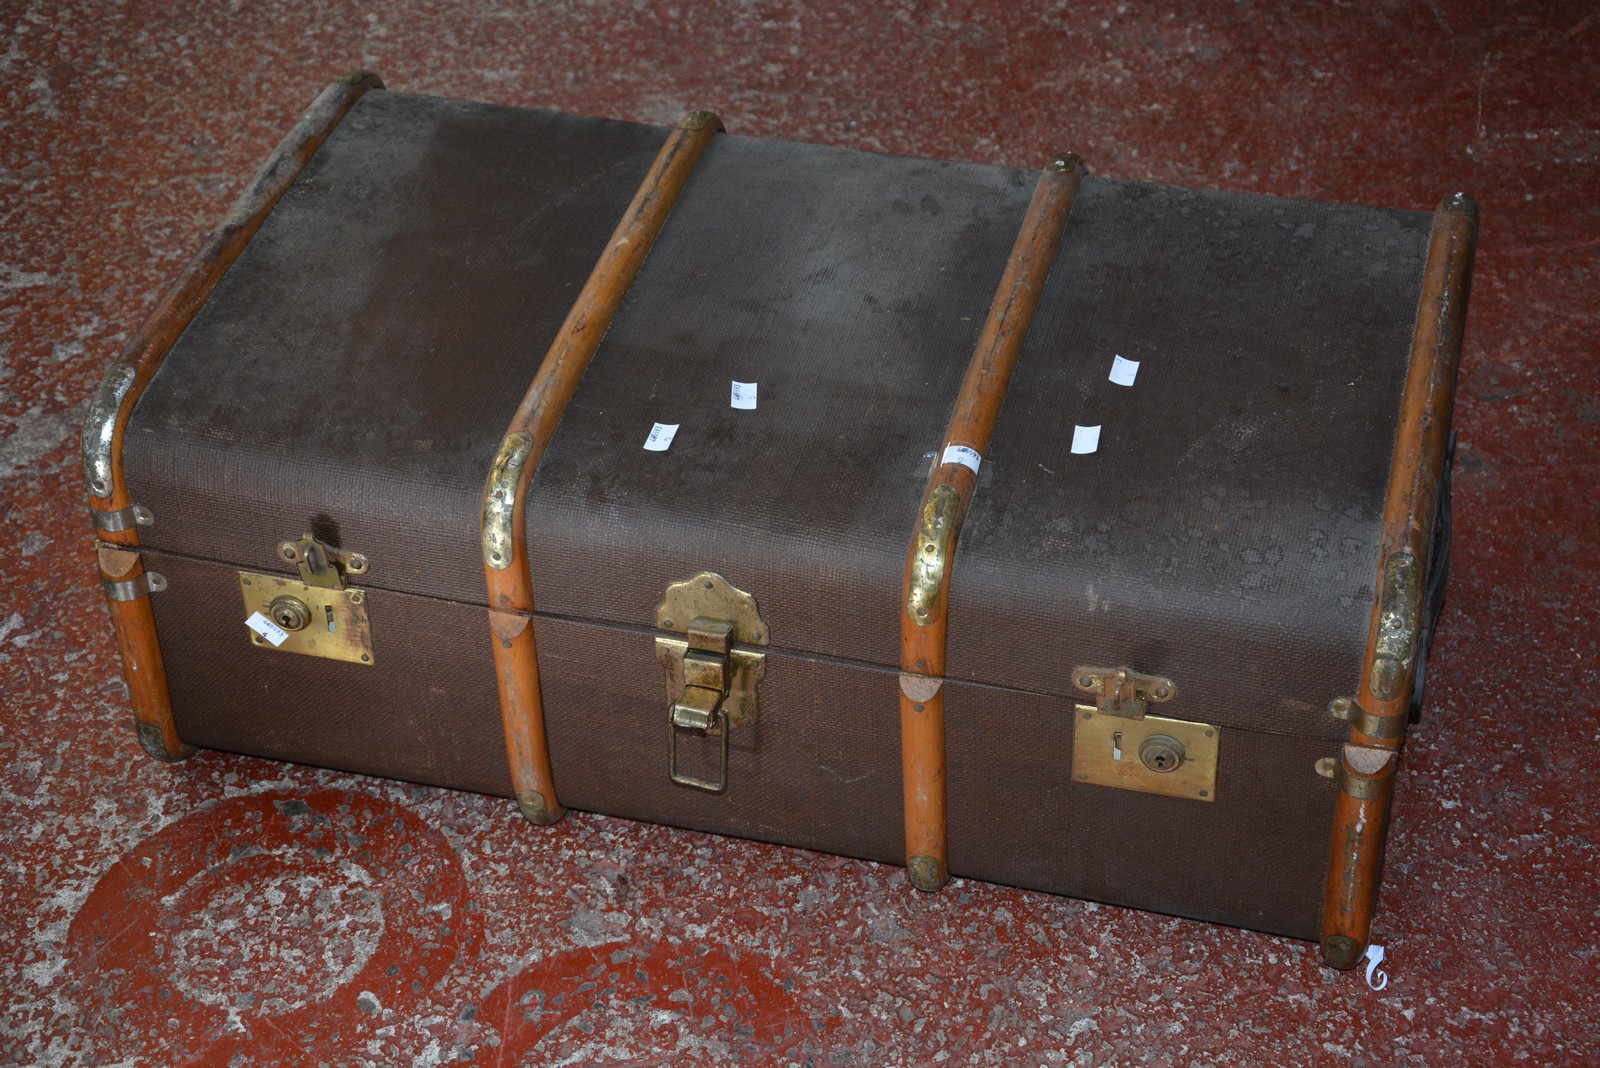 An early 20th Century canvas and wood steamer trunk. (No tray). Best Bid